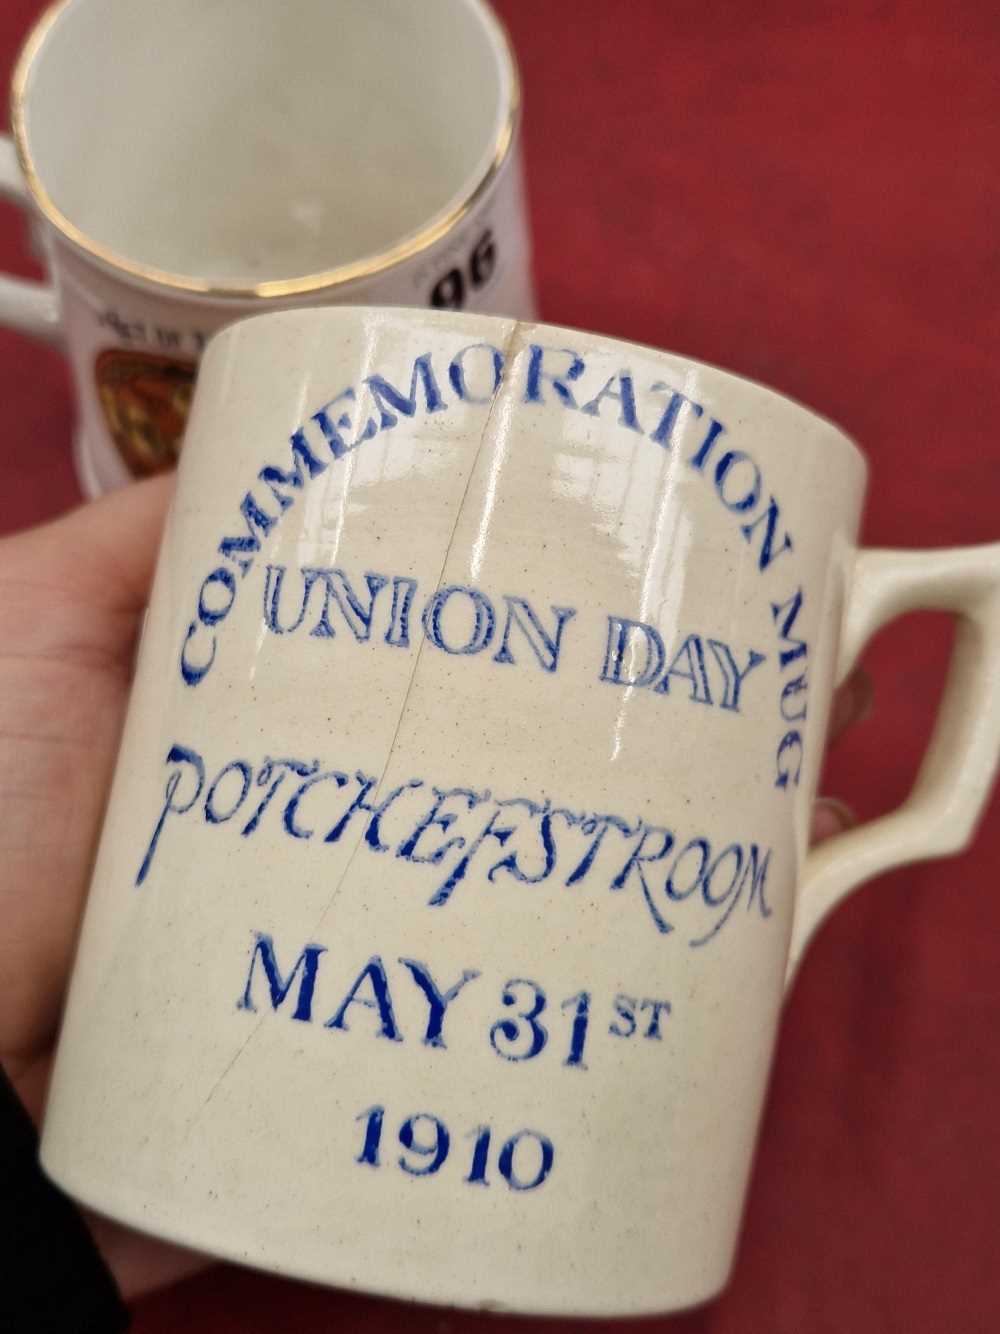 Two rare South Africa commemorative union day 1910 mugs. - Image 2 of 5